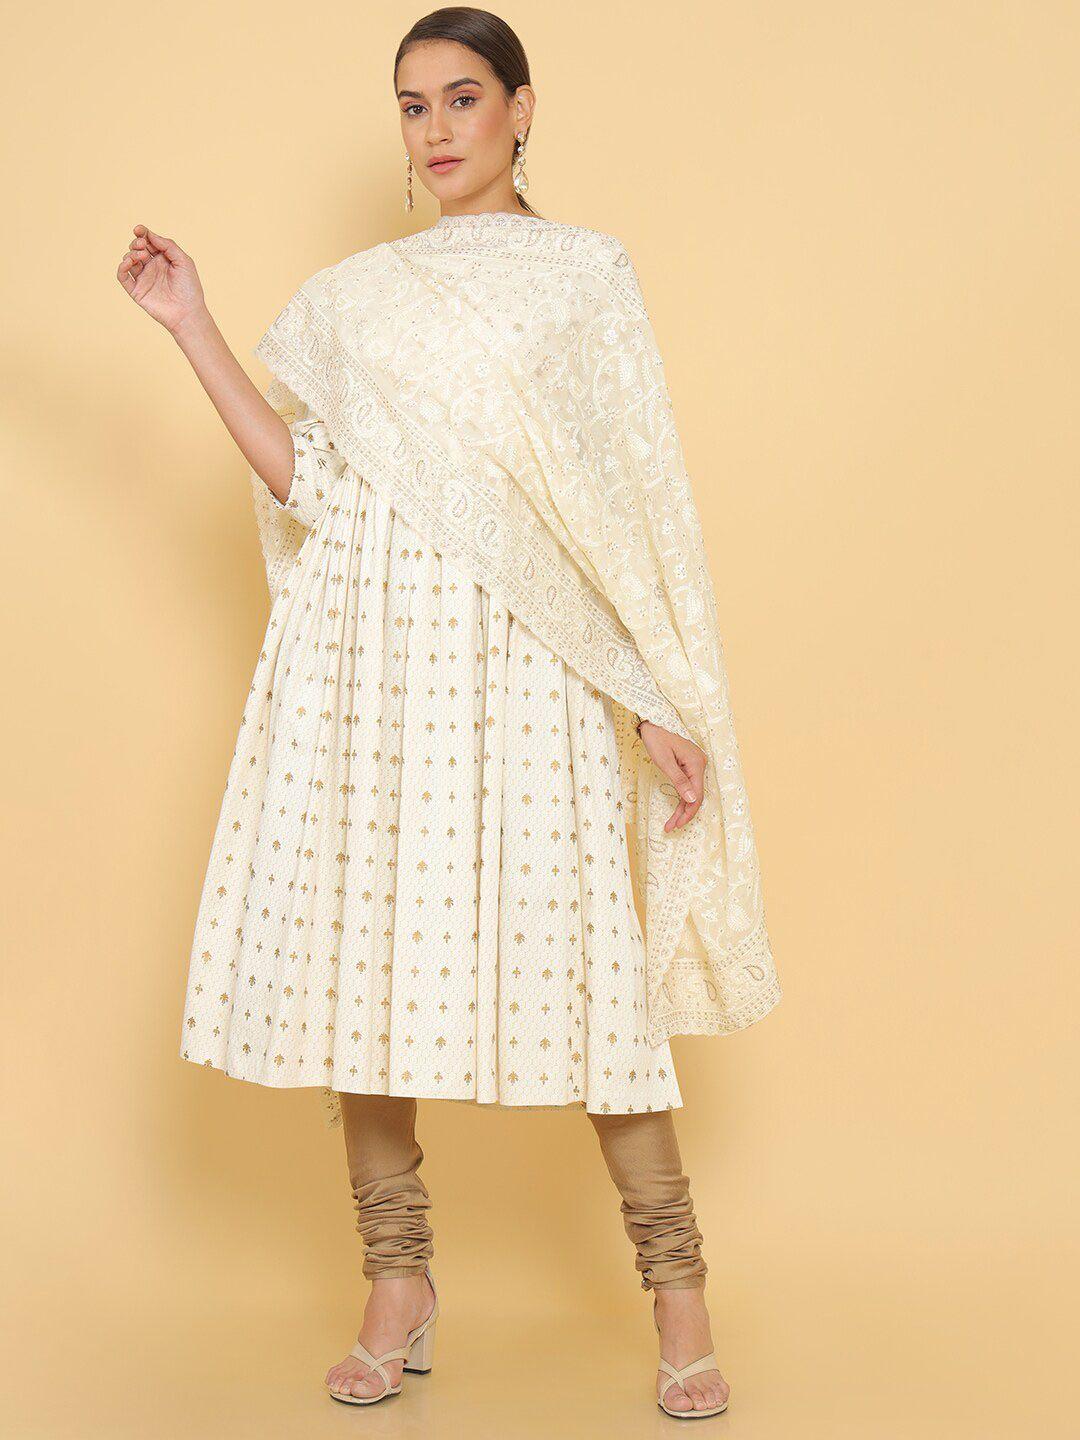 soch-off-white-&-beige-paisley-embroidered-dupatta-with-thread-work